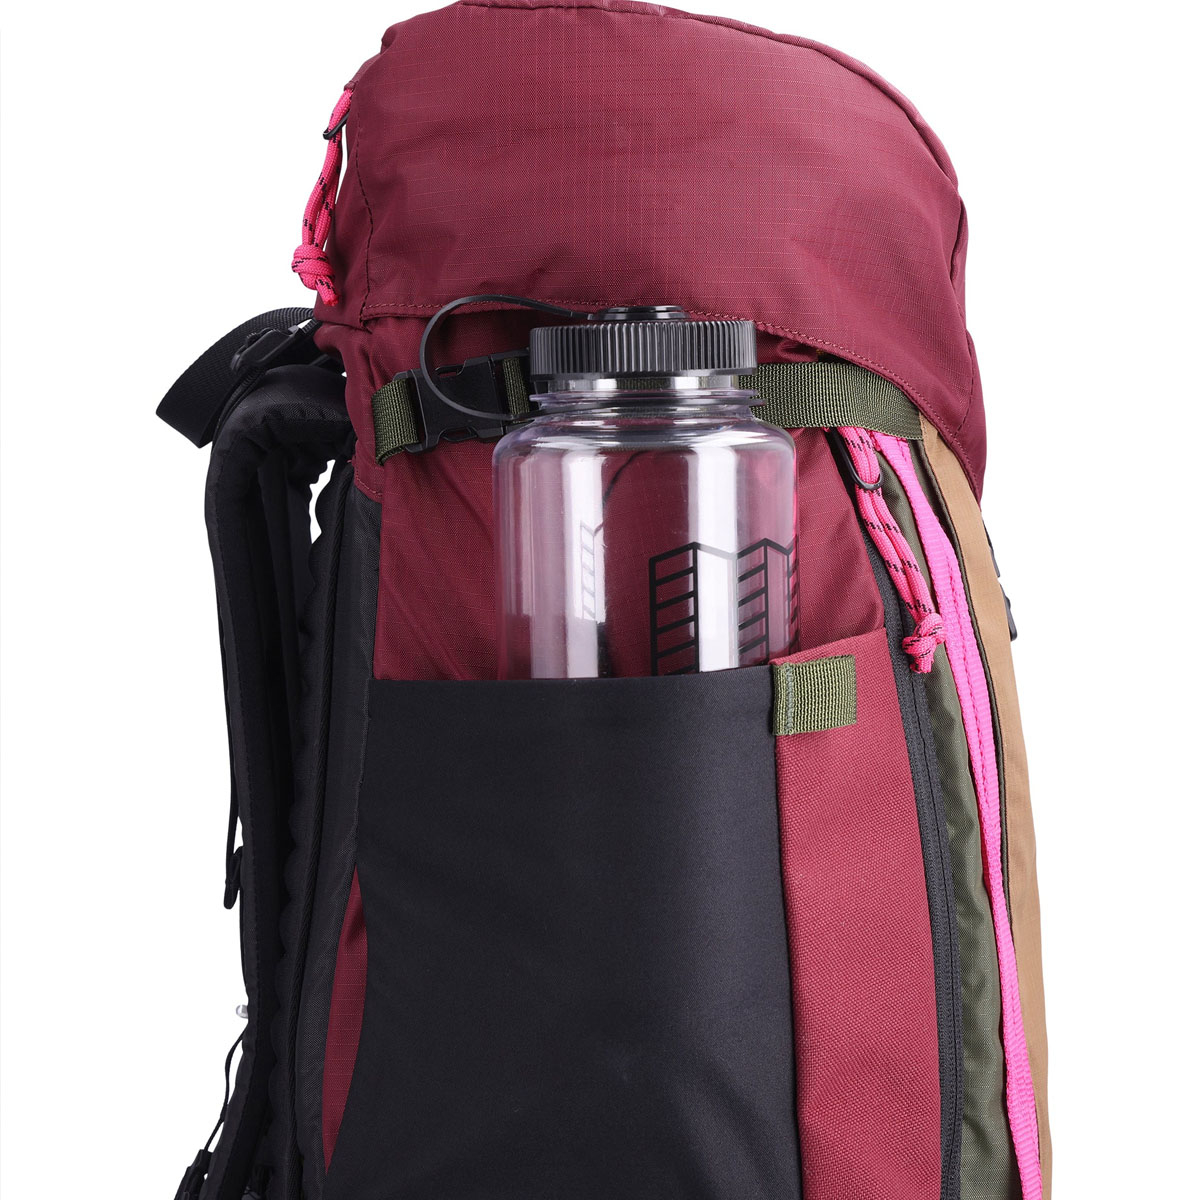 Topo Designs Mountain Pack 28L, side, large side pockets fit a 1.5 Ltr. water bottle